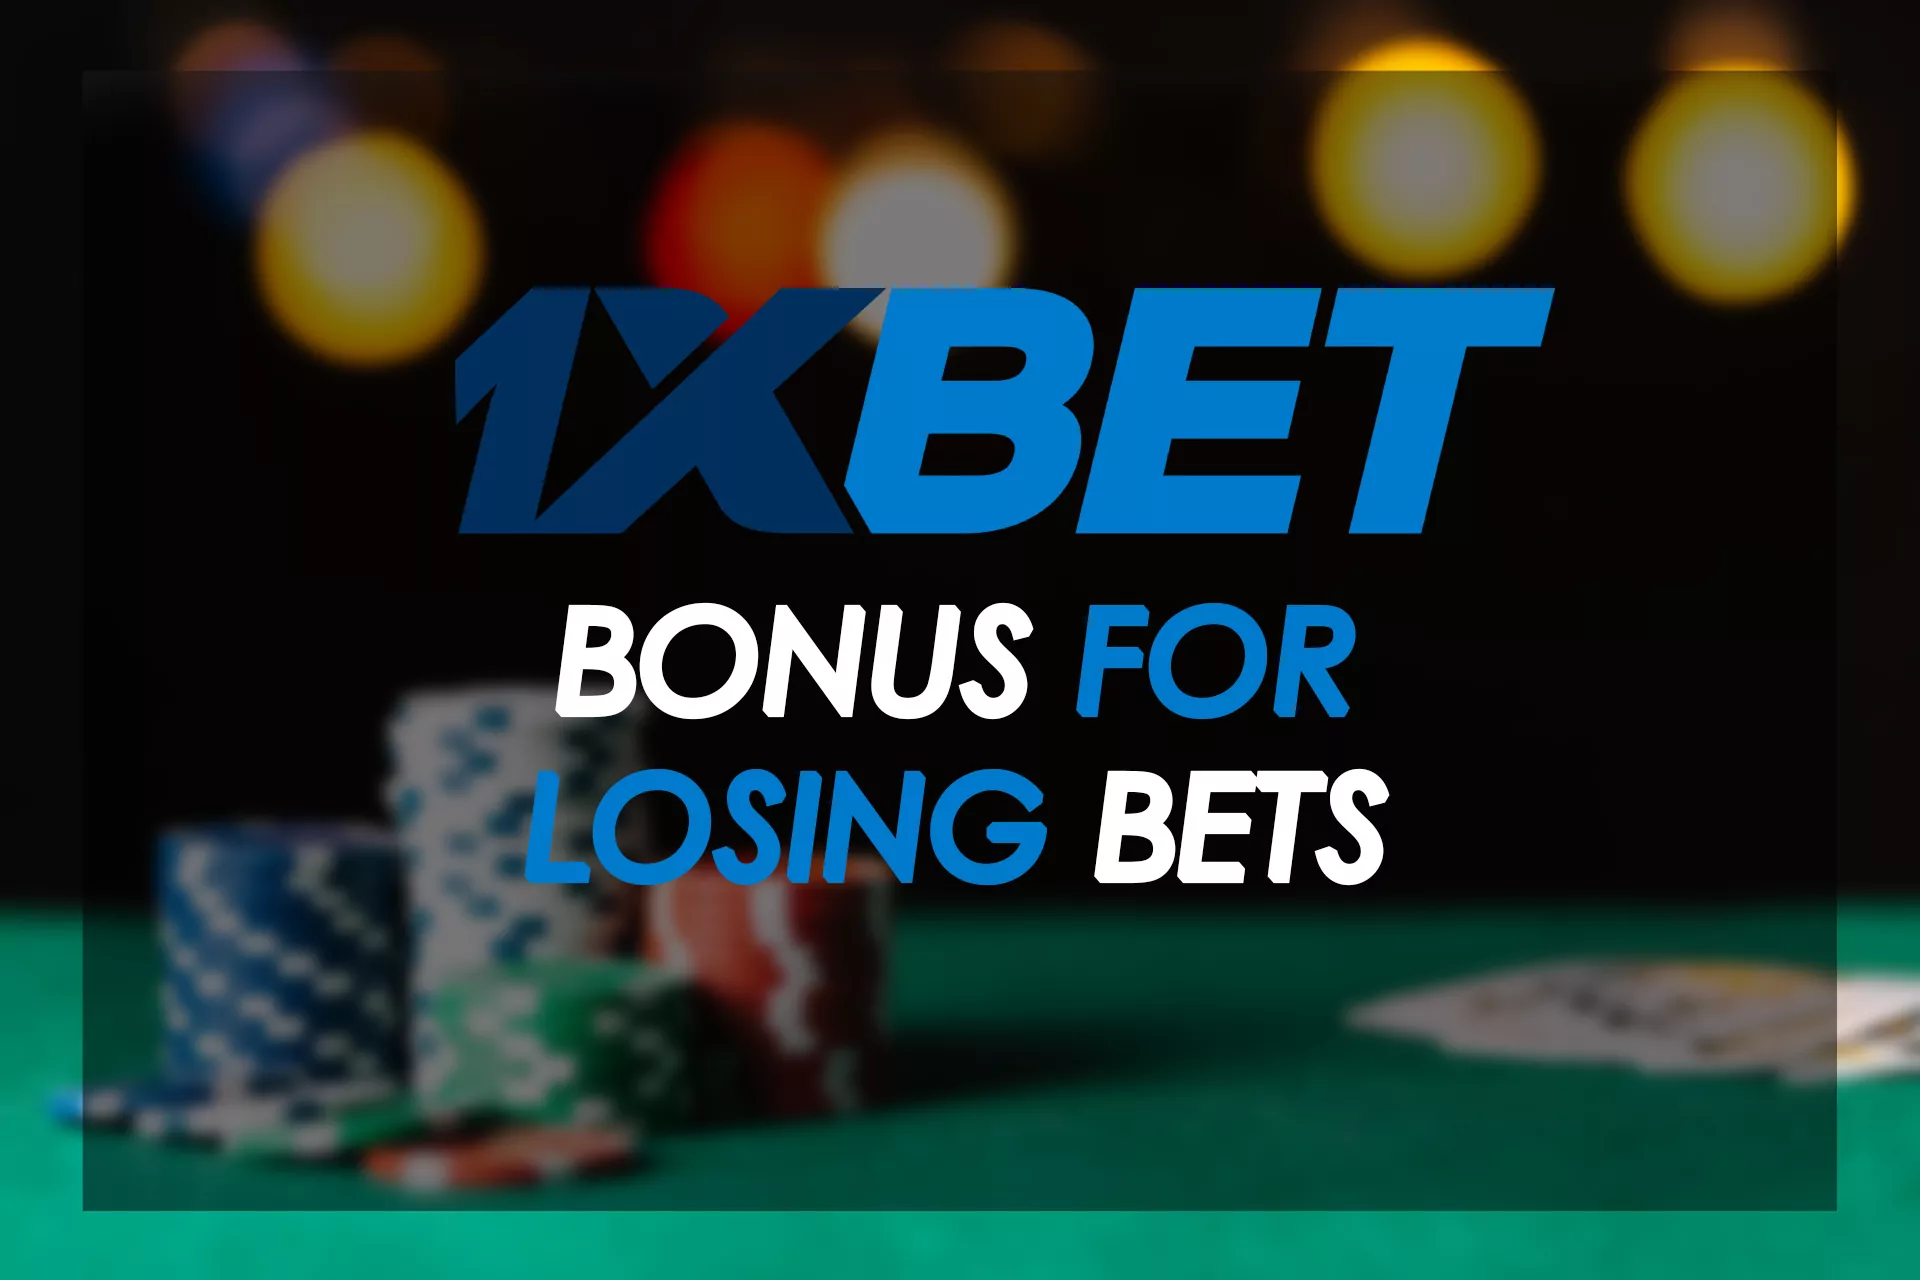 1xBet gives an extra bonus for a series of lost bets.